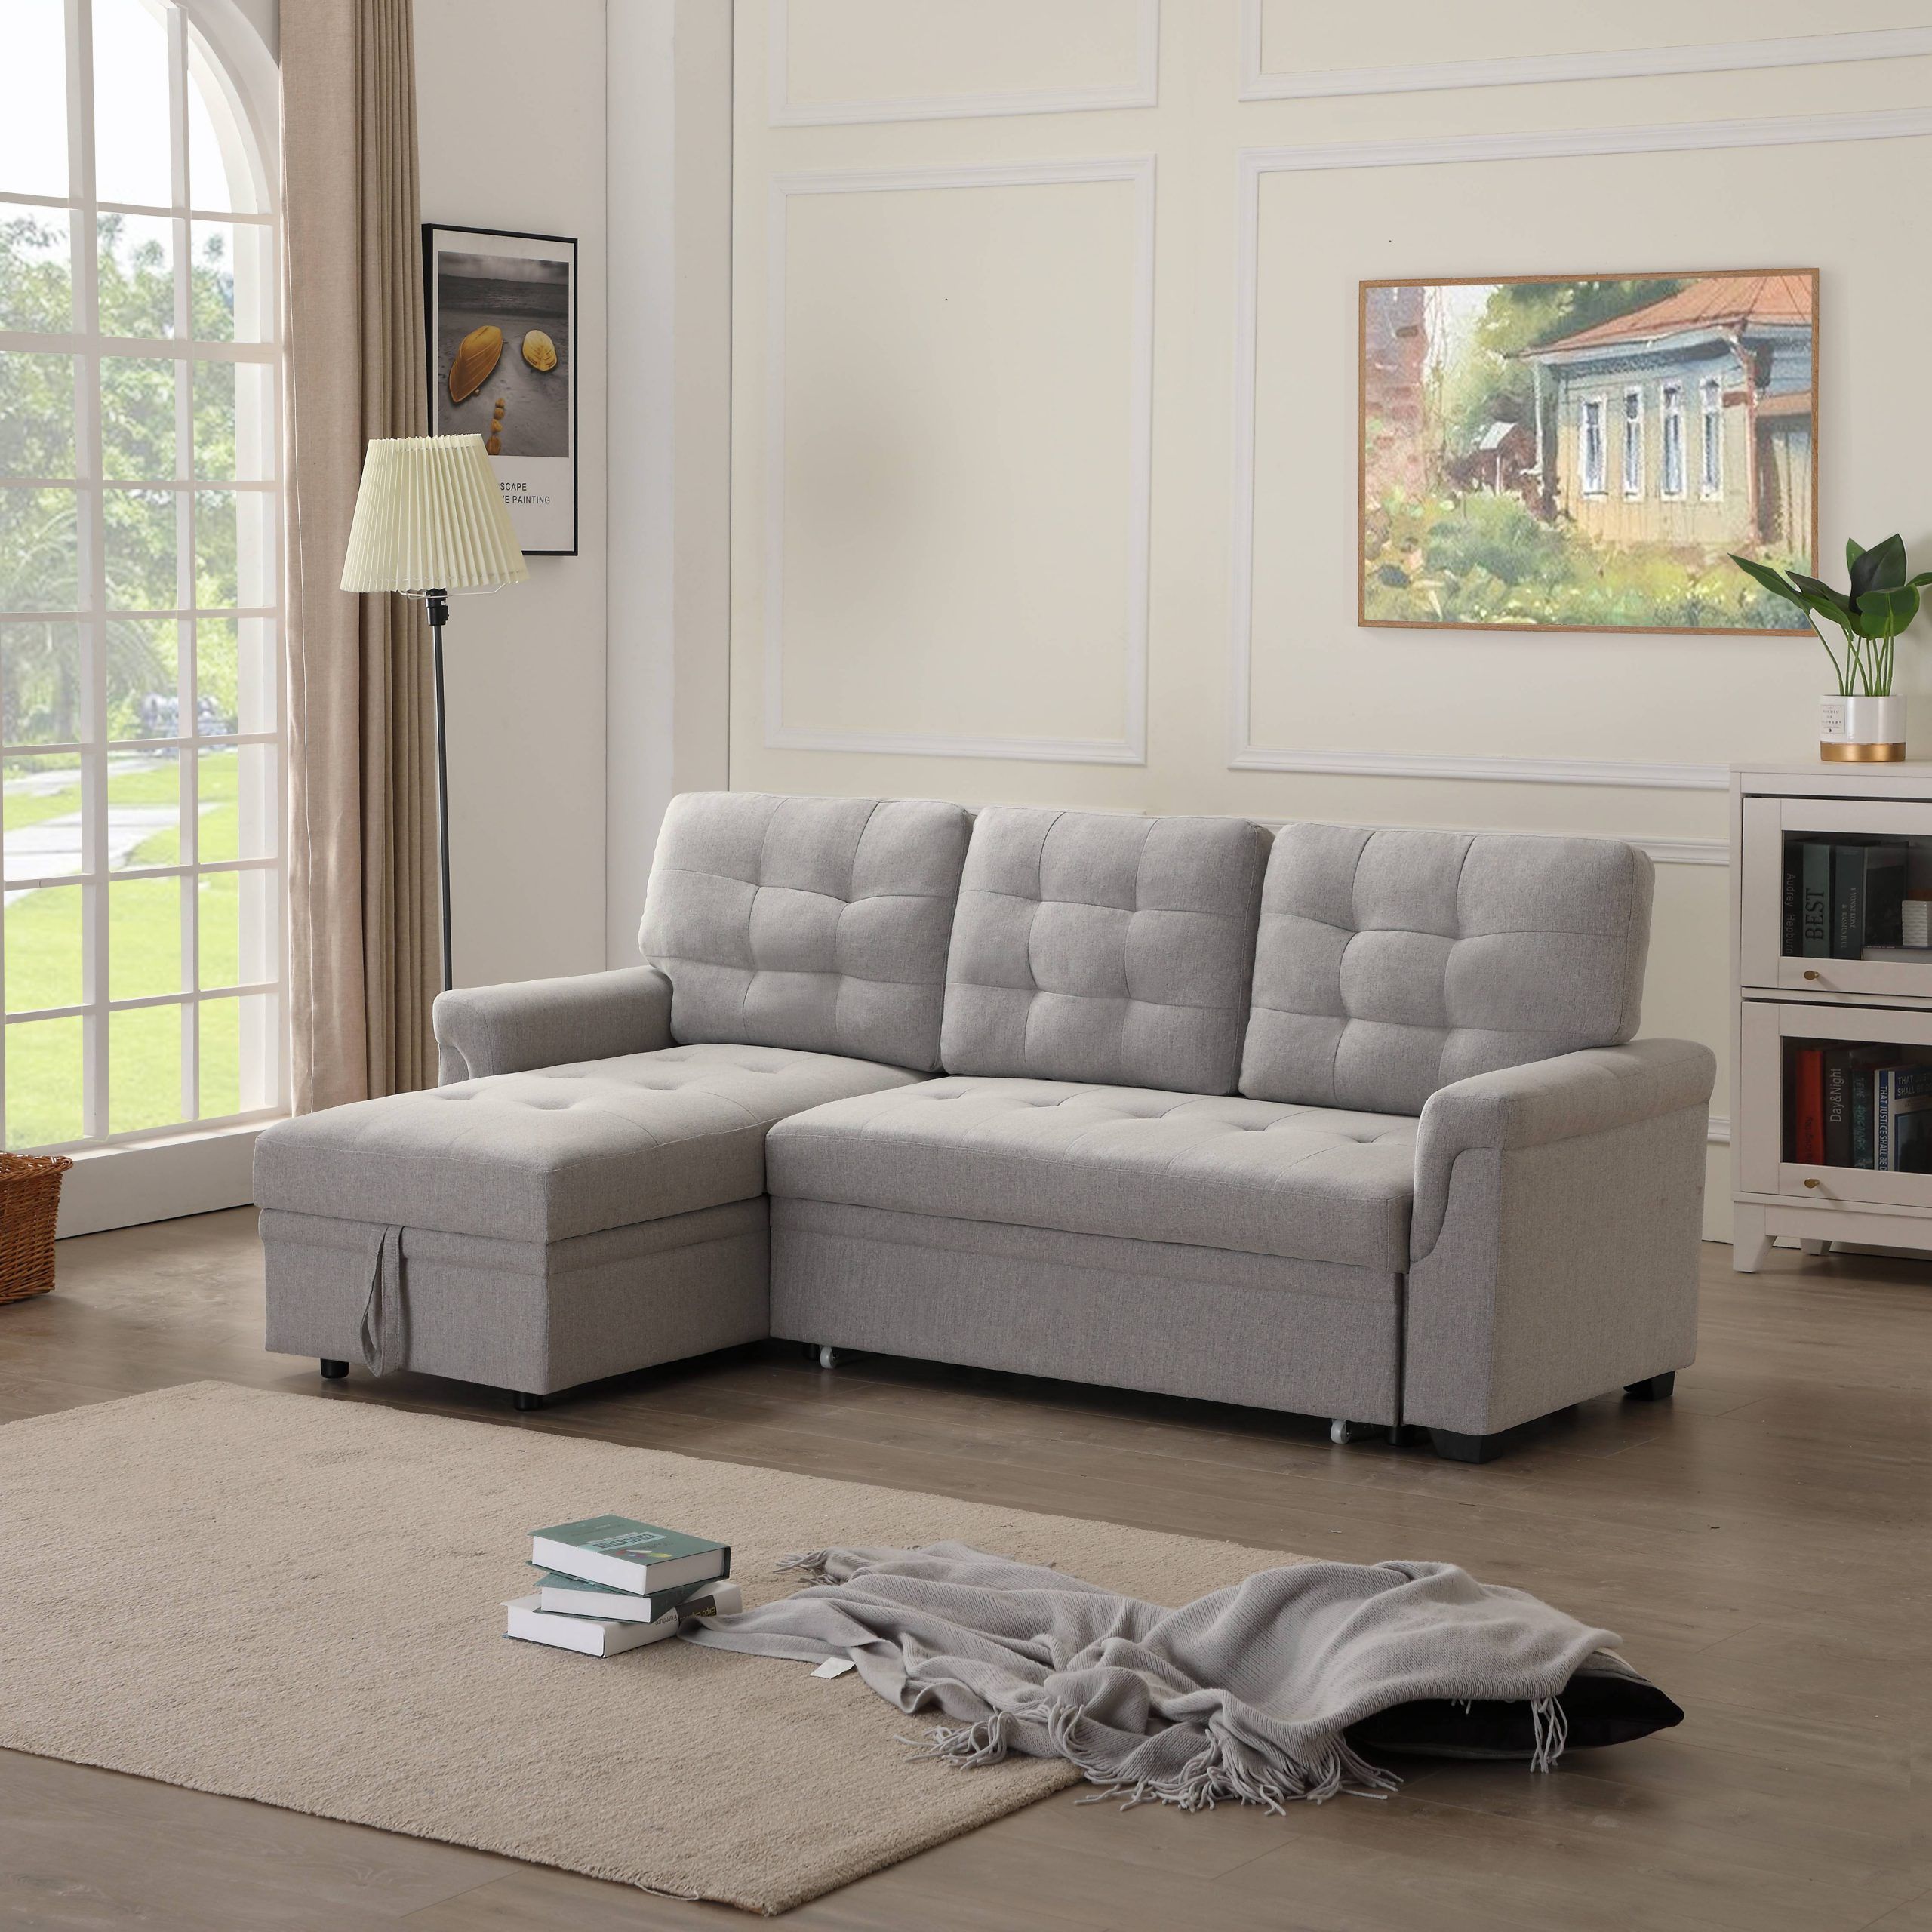 86"w Modern Sectional Sofa Bed With Reversible Chaise, L With Easton Small Space Sectional Futon Sofas (View 11 of 15)